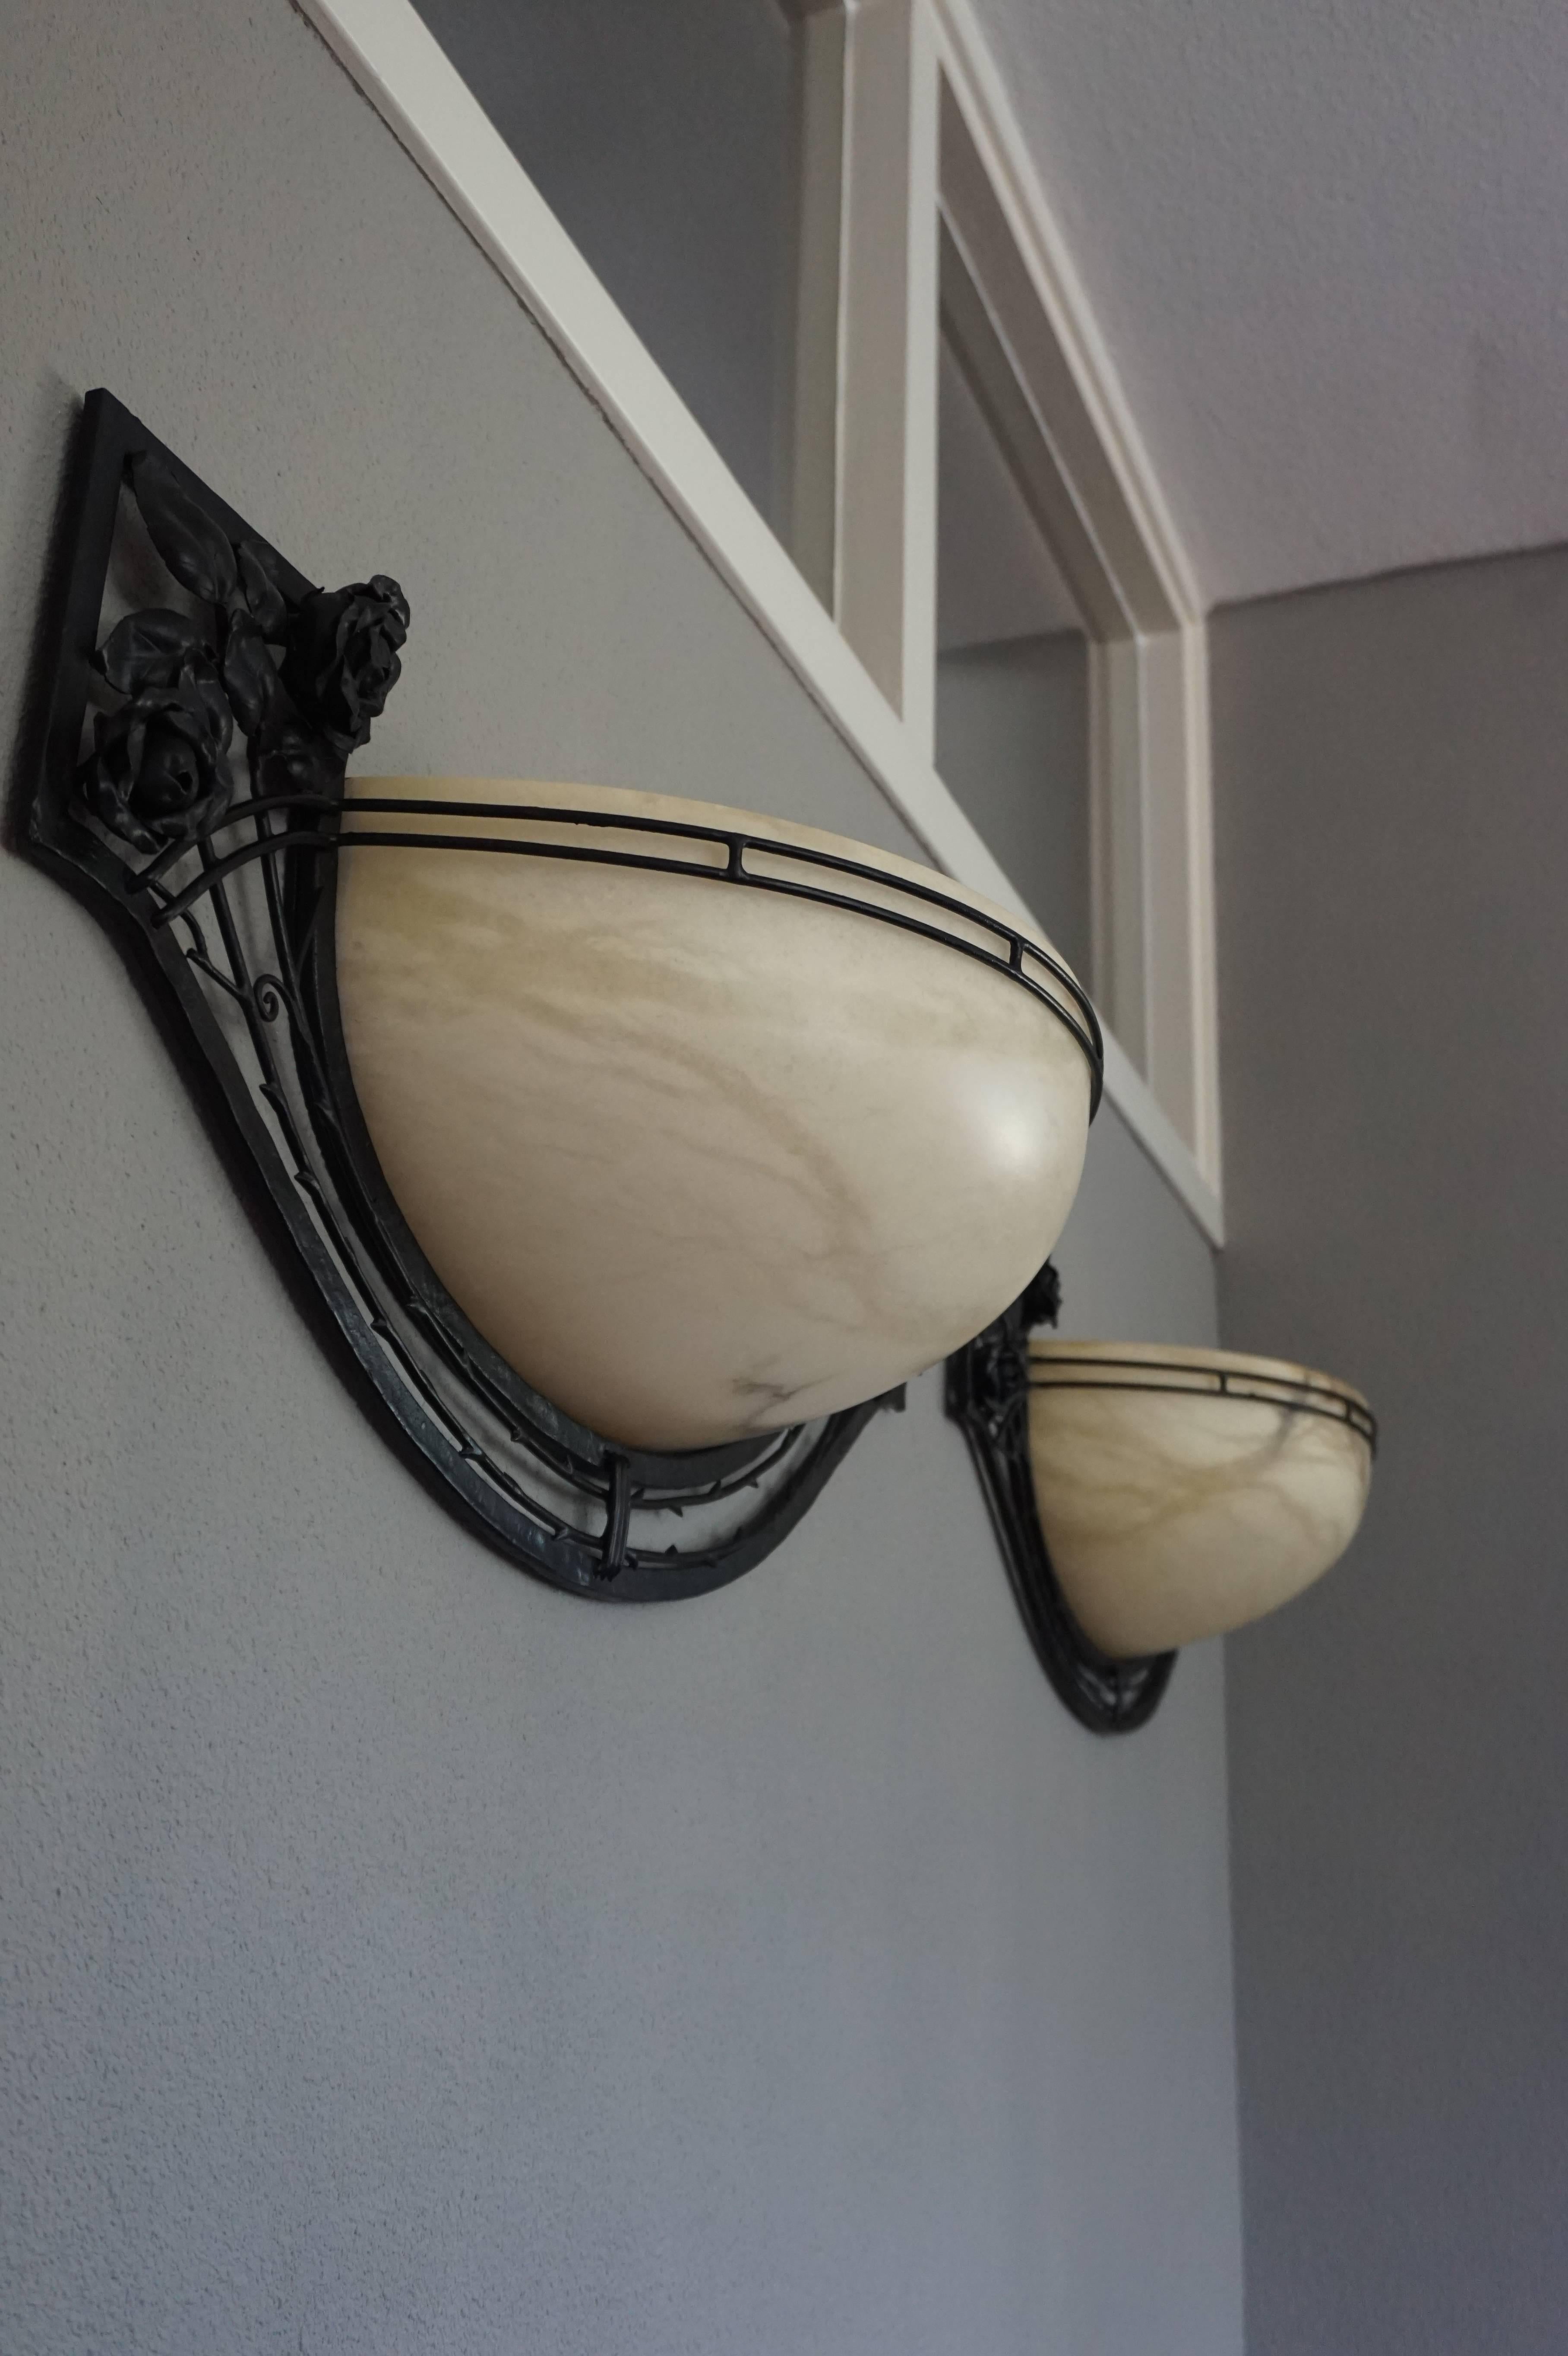 Impressive pair of sizable wall sconces with perfect alabaster shades.

This rare pair of Art Deco style sconces is beautiful both in design and execution. The combination of the blackened iron with the hand-crafted rose motifs and the creamy white,